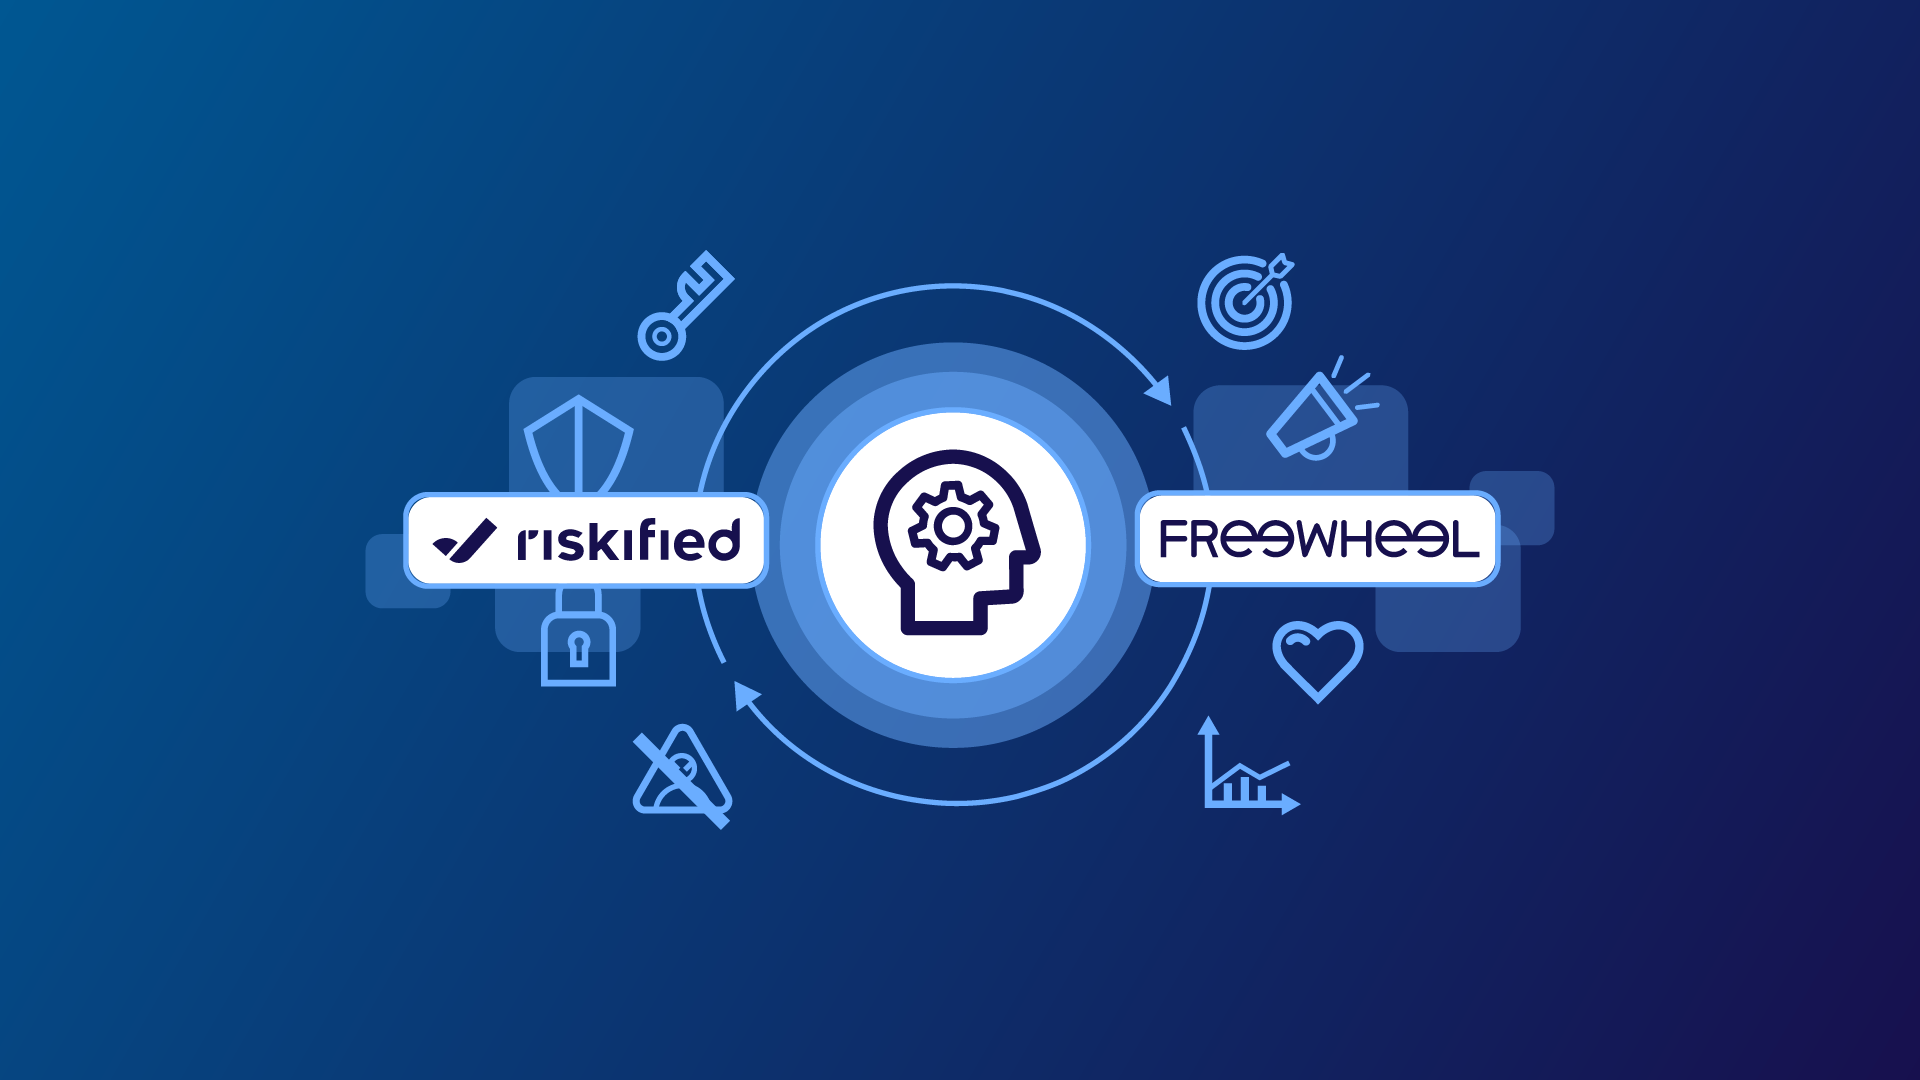 an icon of a head with a cog in the cranium in a white circle with icons floating on the left and the right side with the Riskified logo on the left and the FreeWheel logo on the right.